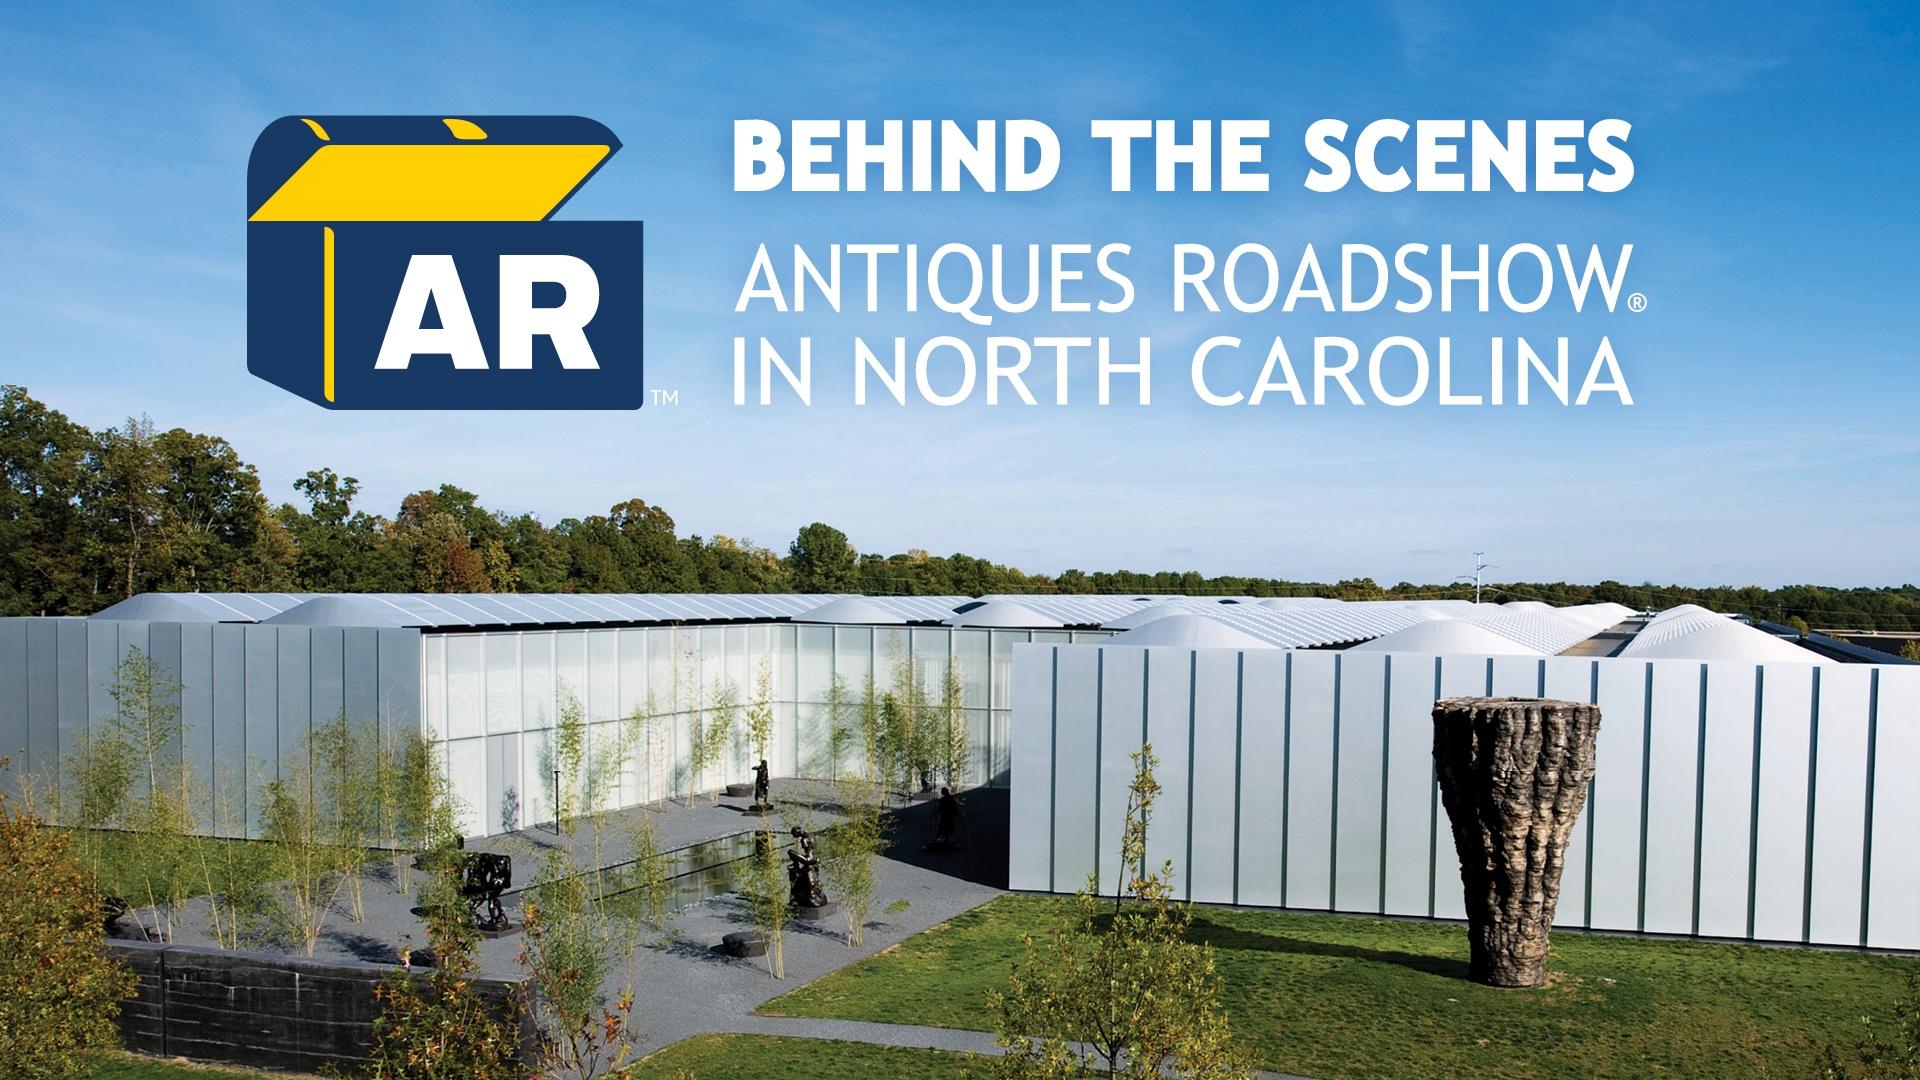 The Antiques Roadshow logo with the text, "BEHIND THE SCENES ANTIQUES ROADSHOW IN NORTH CAROLINA," over an a aerial of the North Carolina Museum of Art.